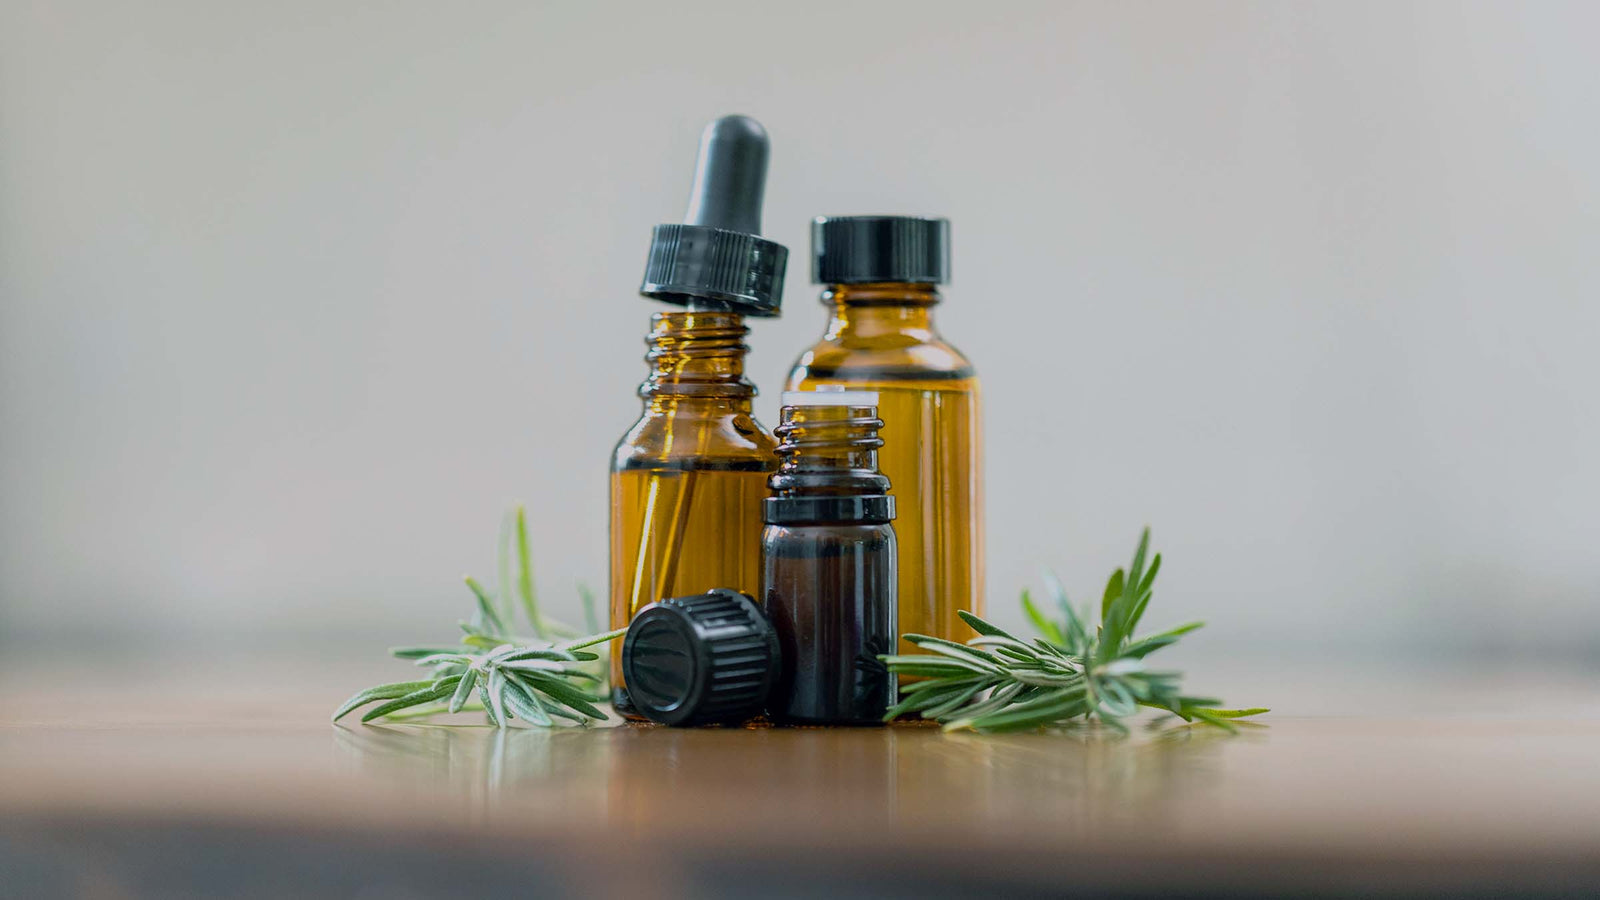 Our Favorite Conifer Oils for the Holiday Season